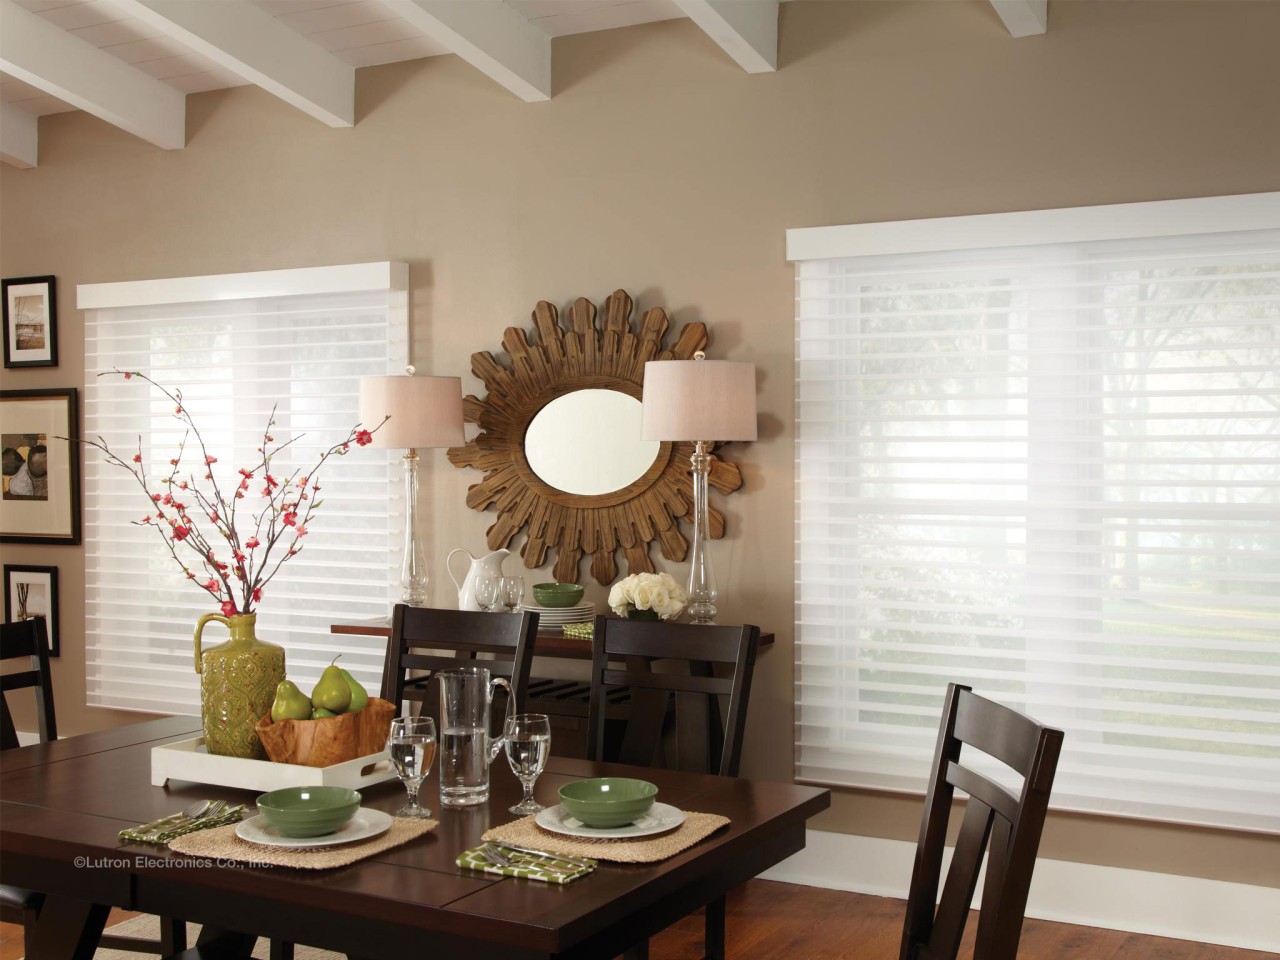 A dining table set with plates and silverware with large windows featuring motorized blinds on both sides. 